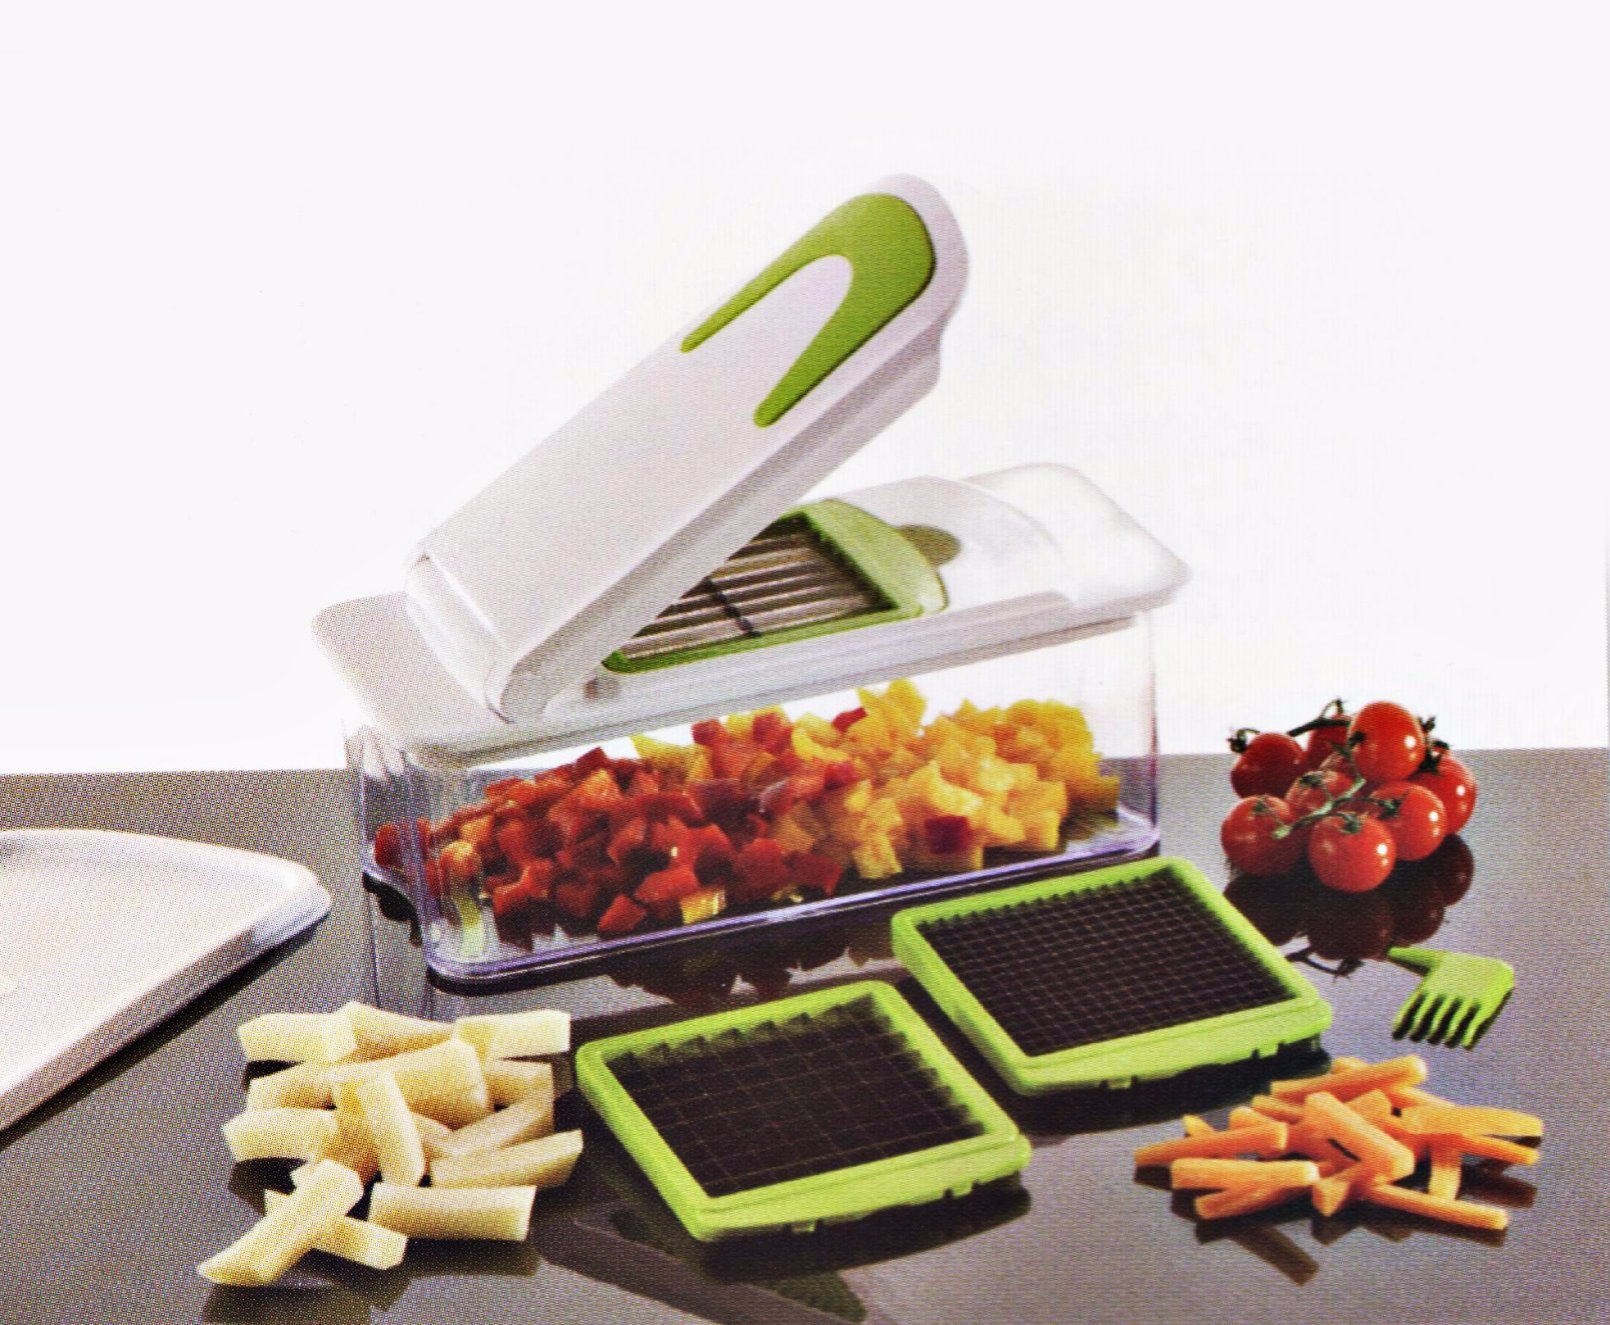 3 in 1 Plastic Vegetable Cutting Food Chopper Dice and Slice Machine Cg080